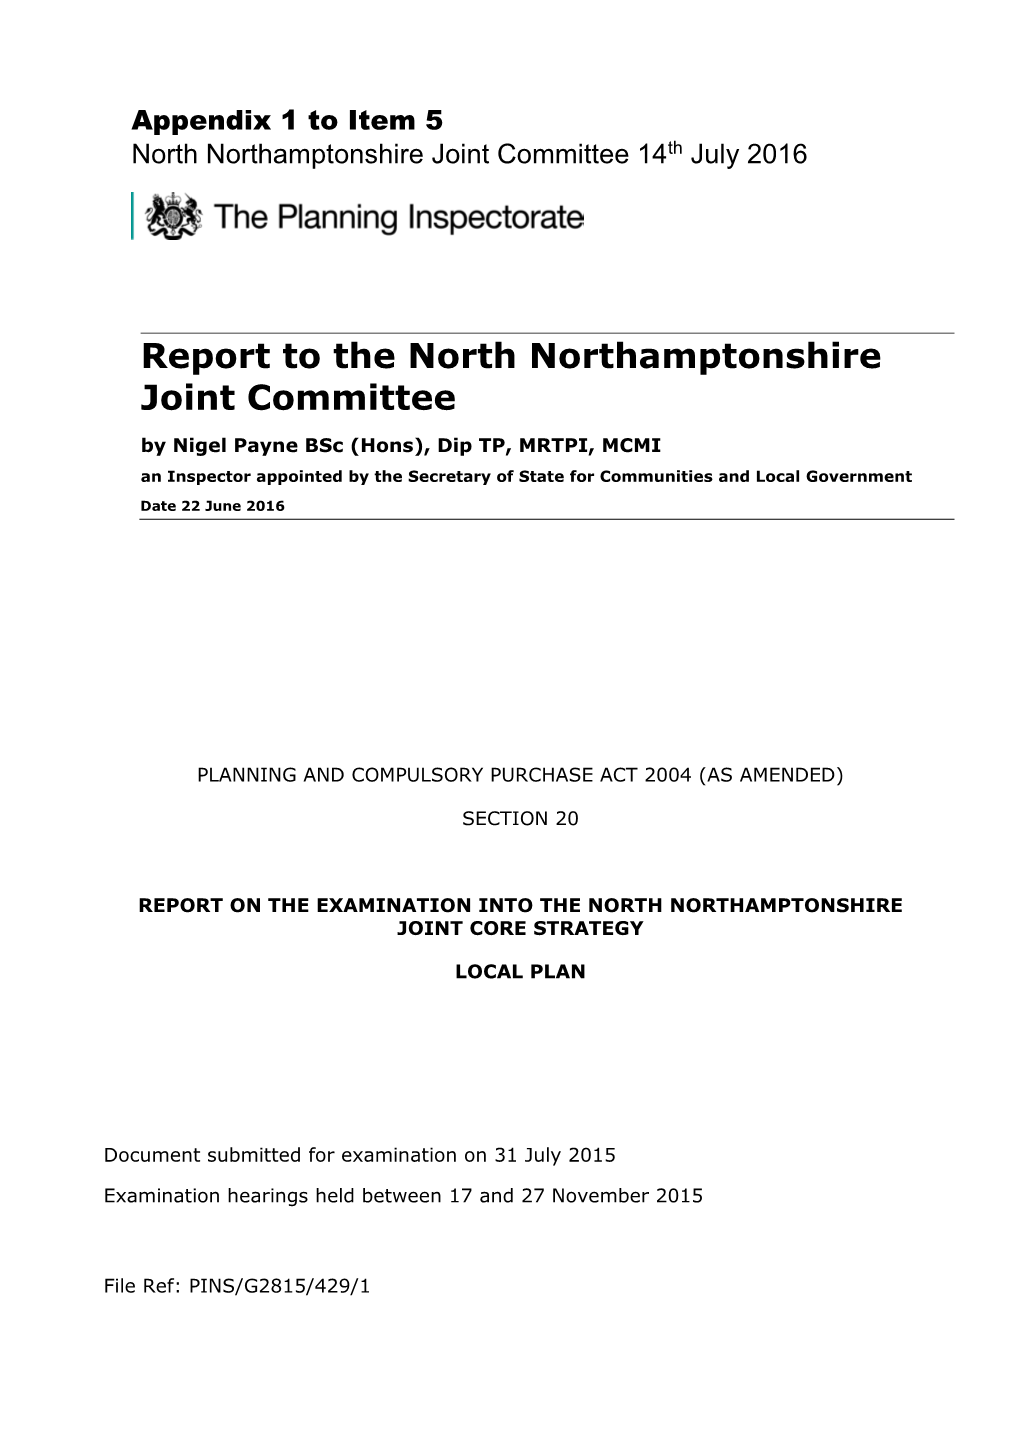 Report to the North Northamptonshire Joint Committee